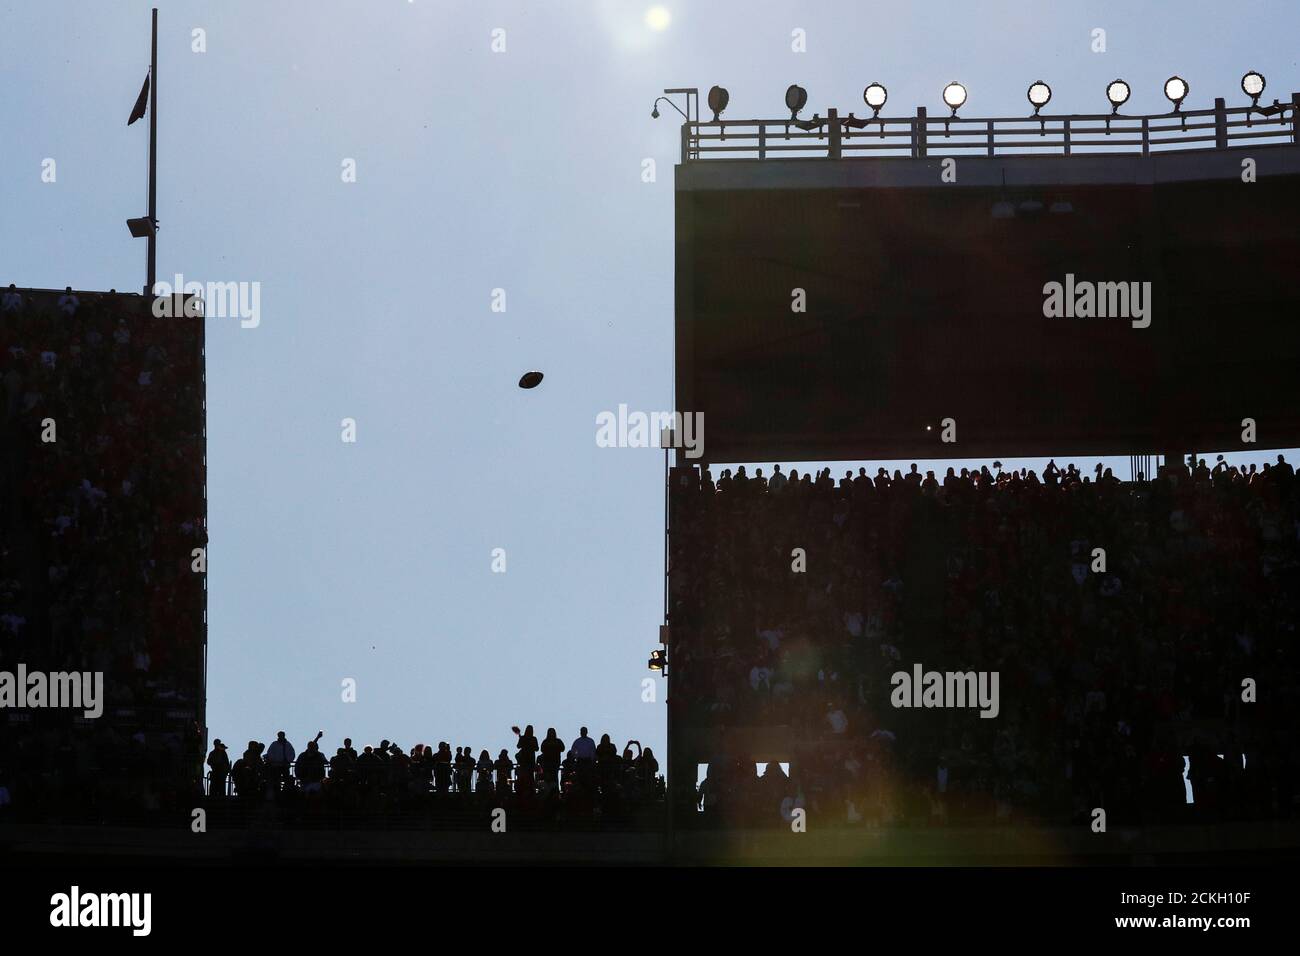 A football flies through the air during a warmup period, during an N.C.A.A. Division I college football game between Louisiana State University and University of Alabama at Bryant-Denny Stadium in Tuscaloosa, Alabama, U.S., November 9, 2019. REUTERS/Tom Brenner Stock Photo